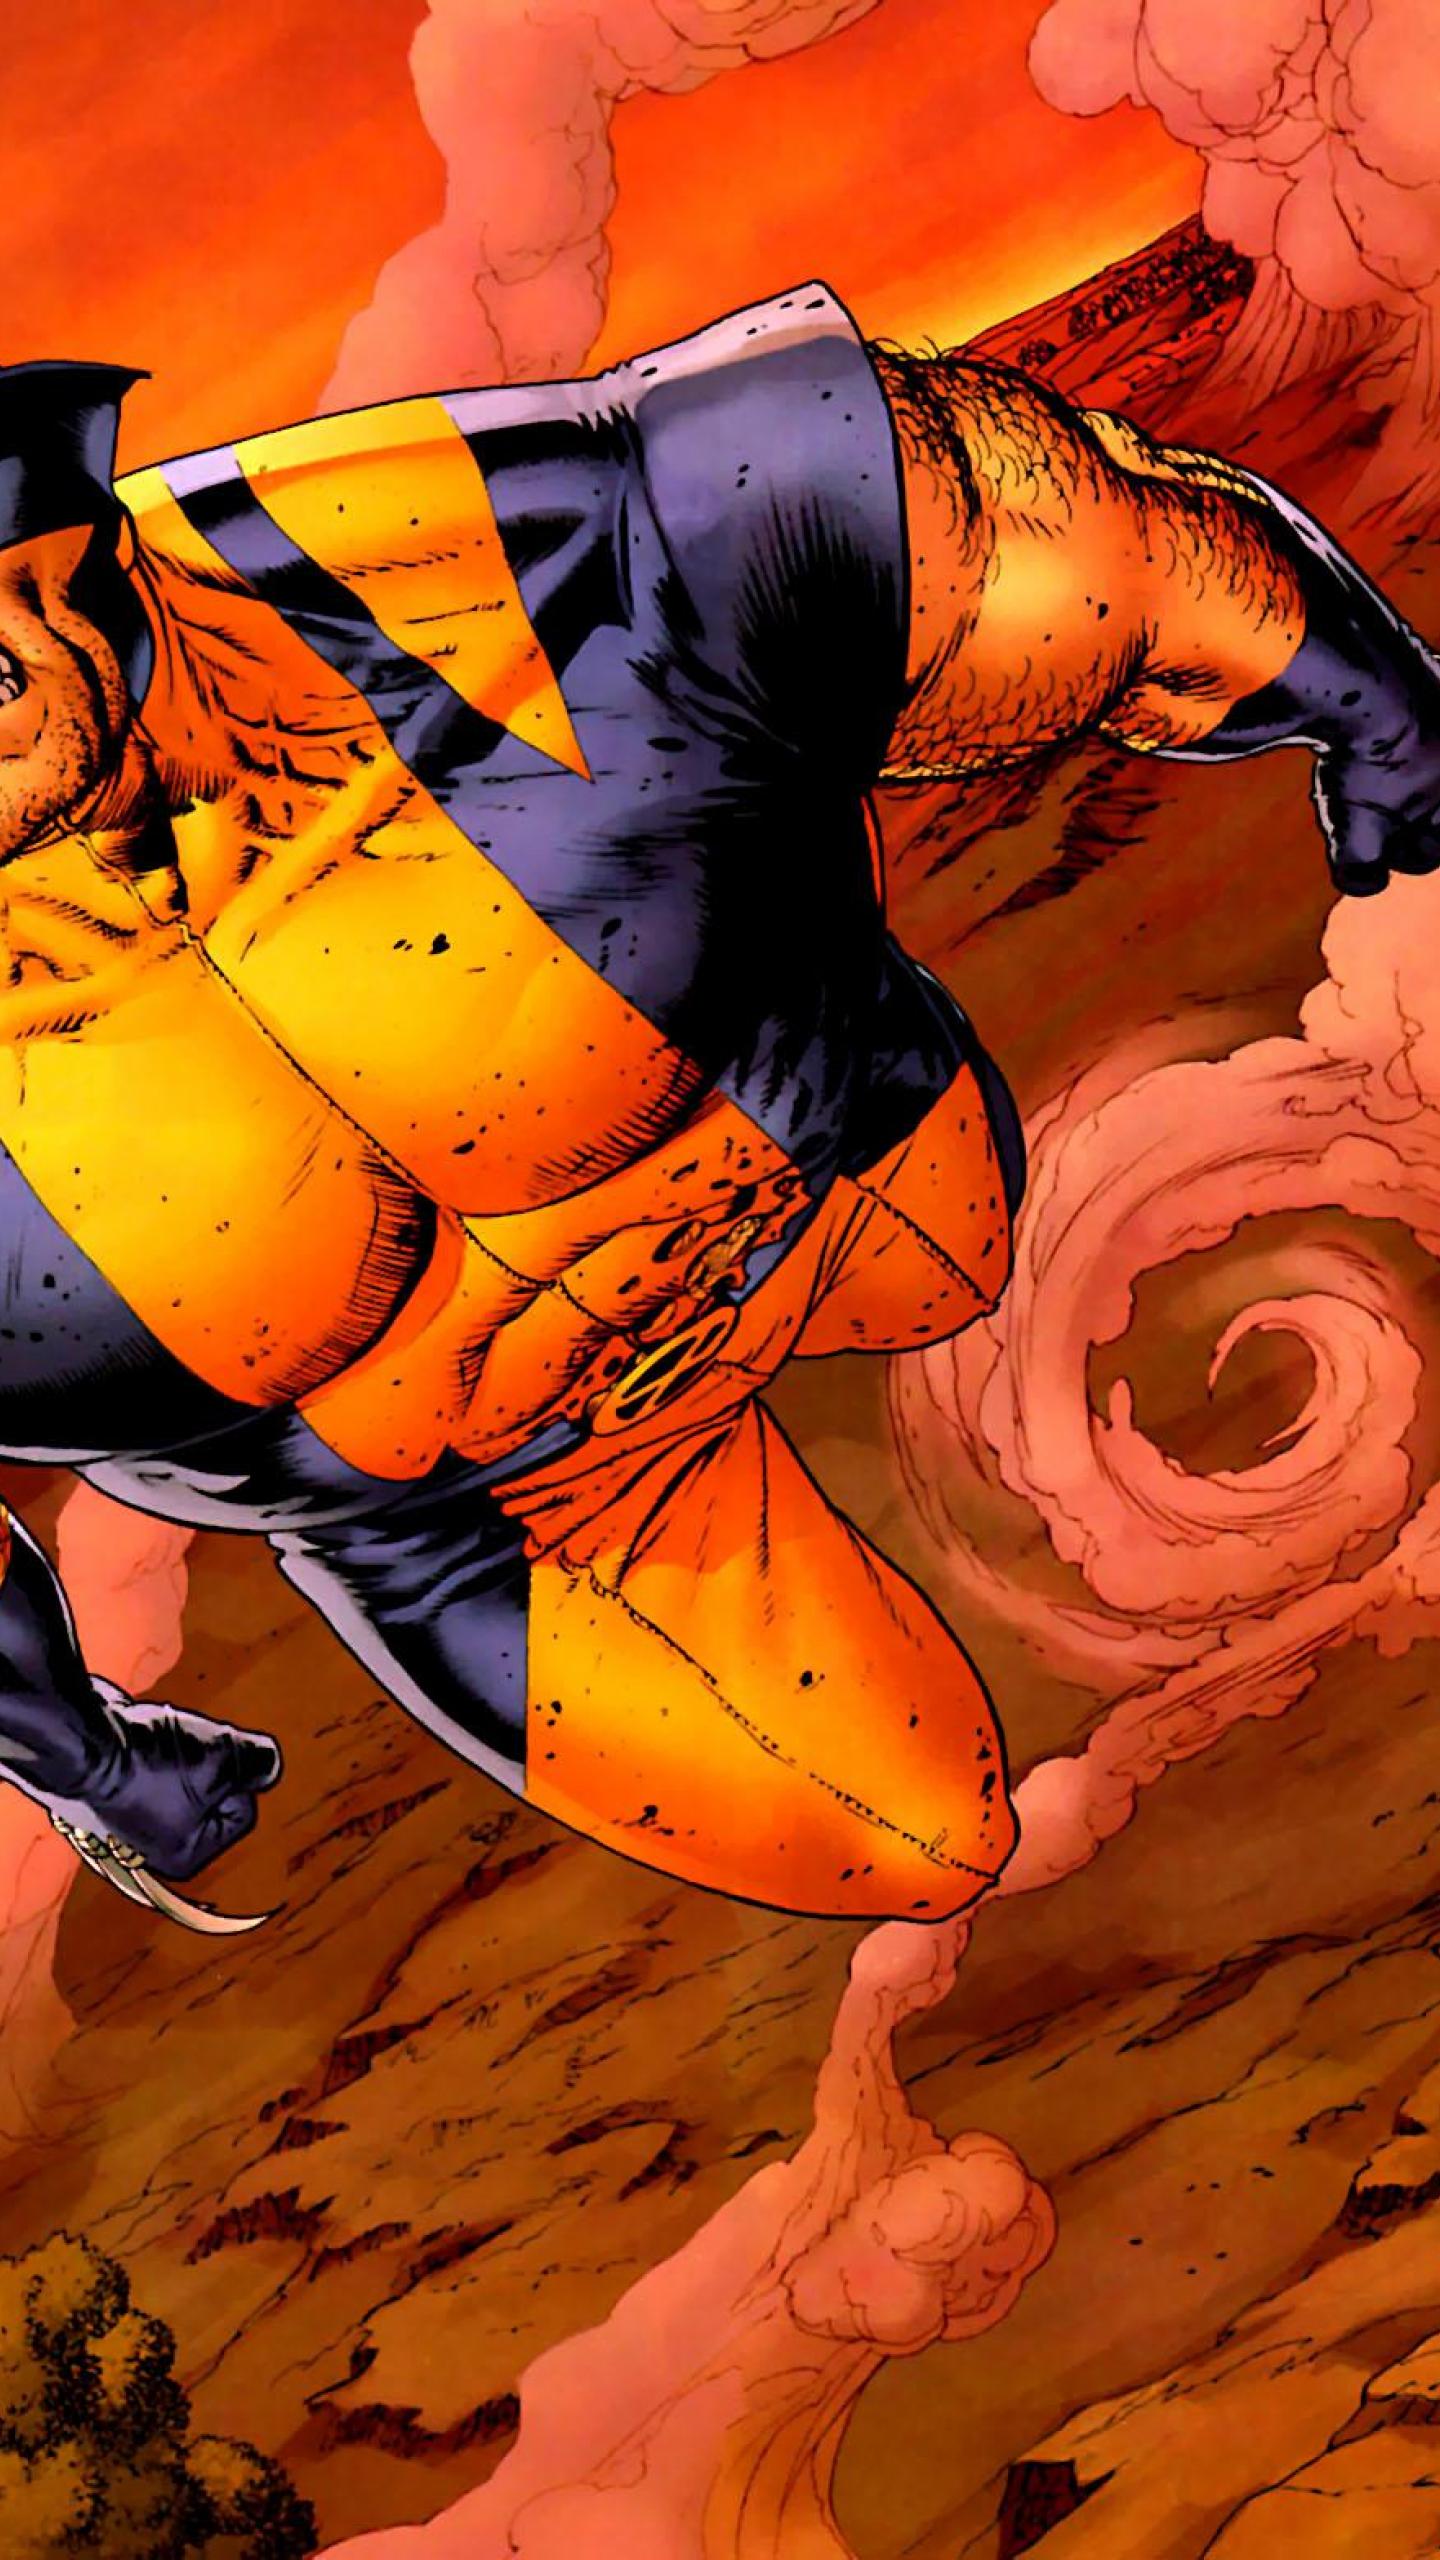 Samsung Galaxy Note 4, 5, Samsung Galaxy S6, S6 Edge - Astonishing X Men Fastball Special , HD Wallpaper & Backgrounds